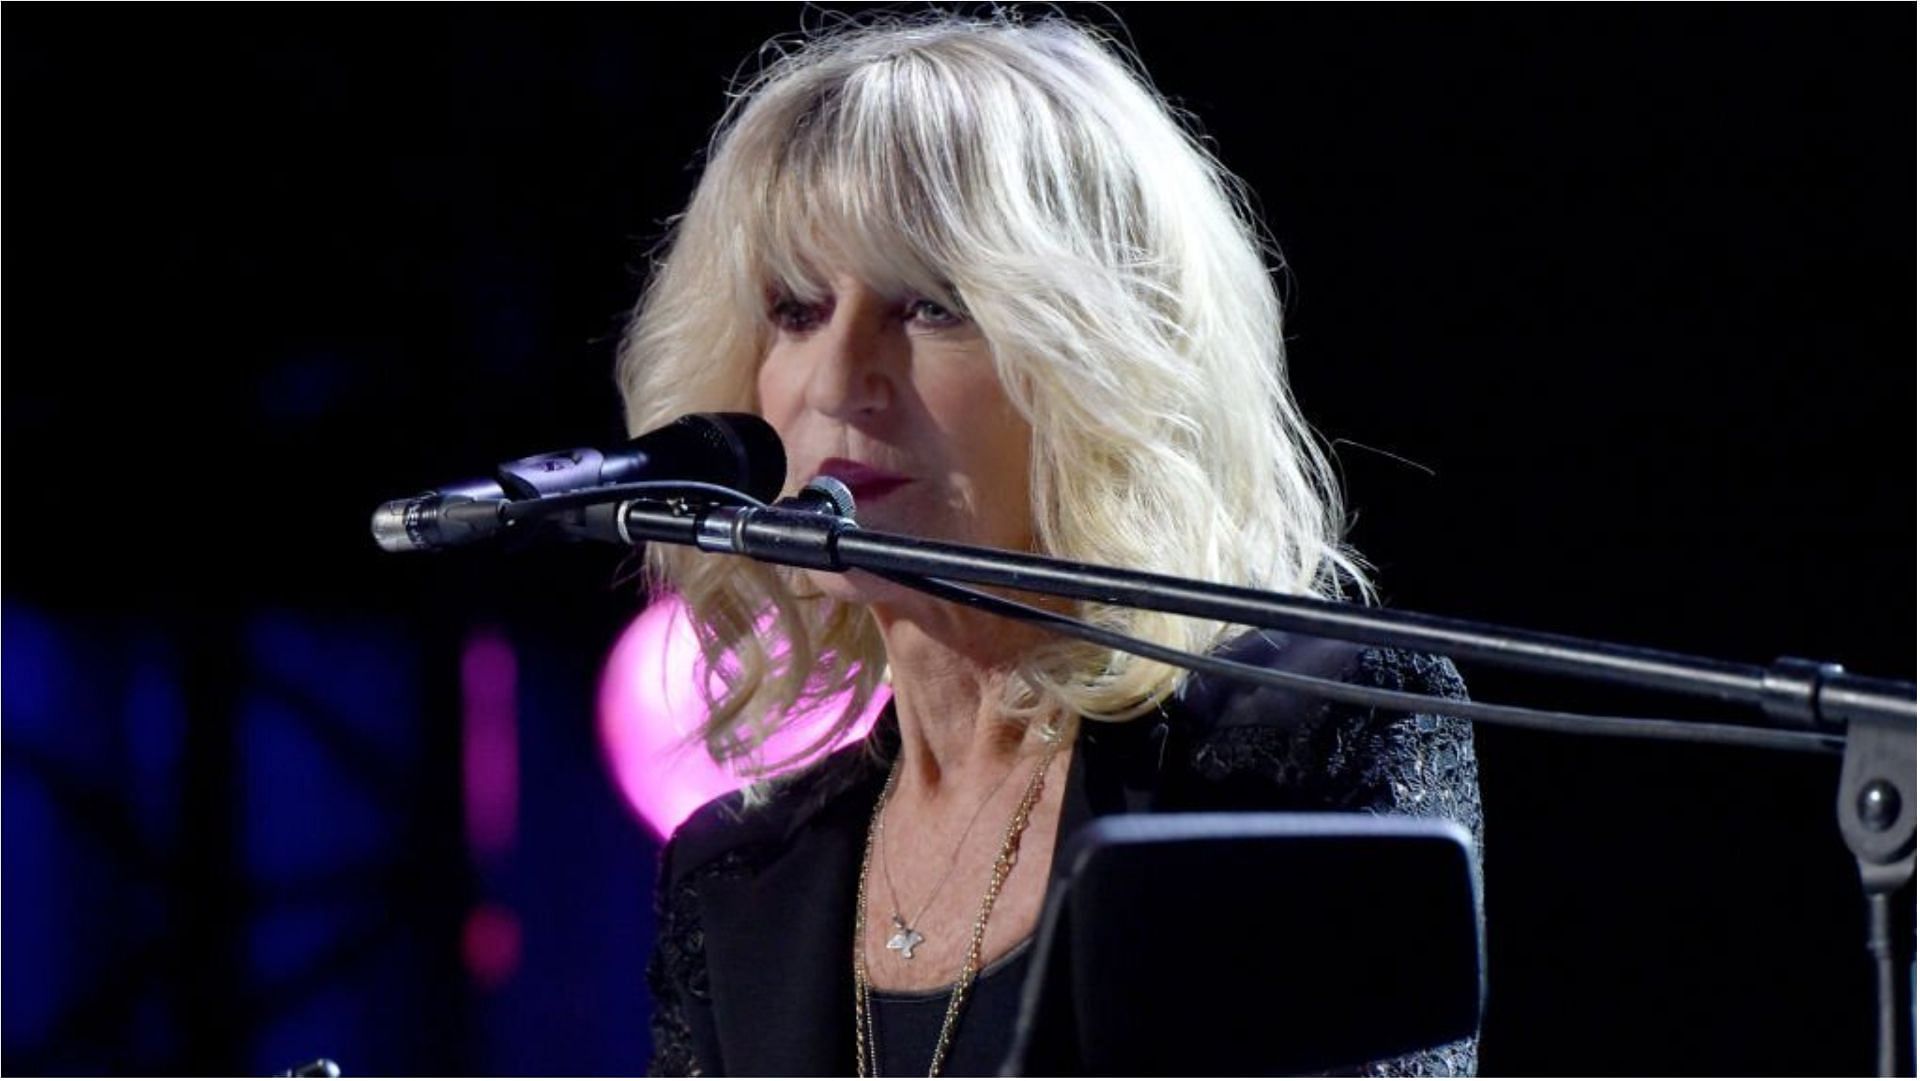 Christine McVie recently passed away at the age of 79 (Image via Lester Cohen/Getty Images)